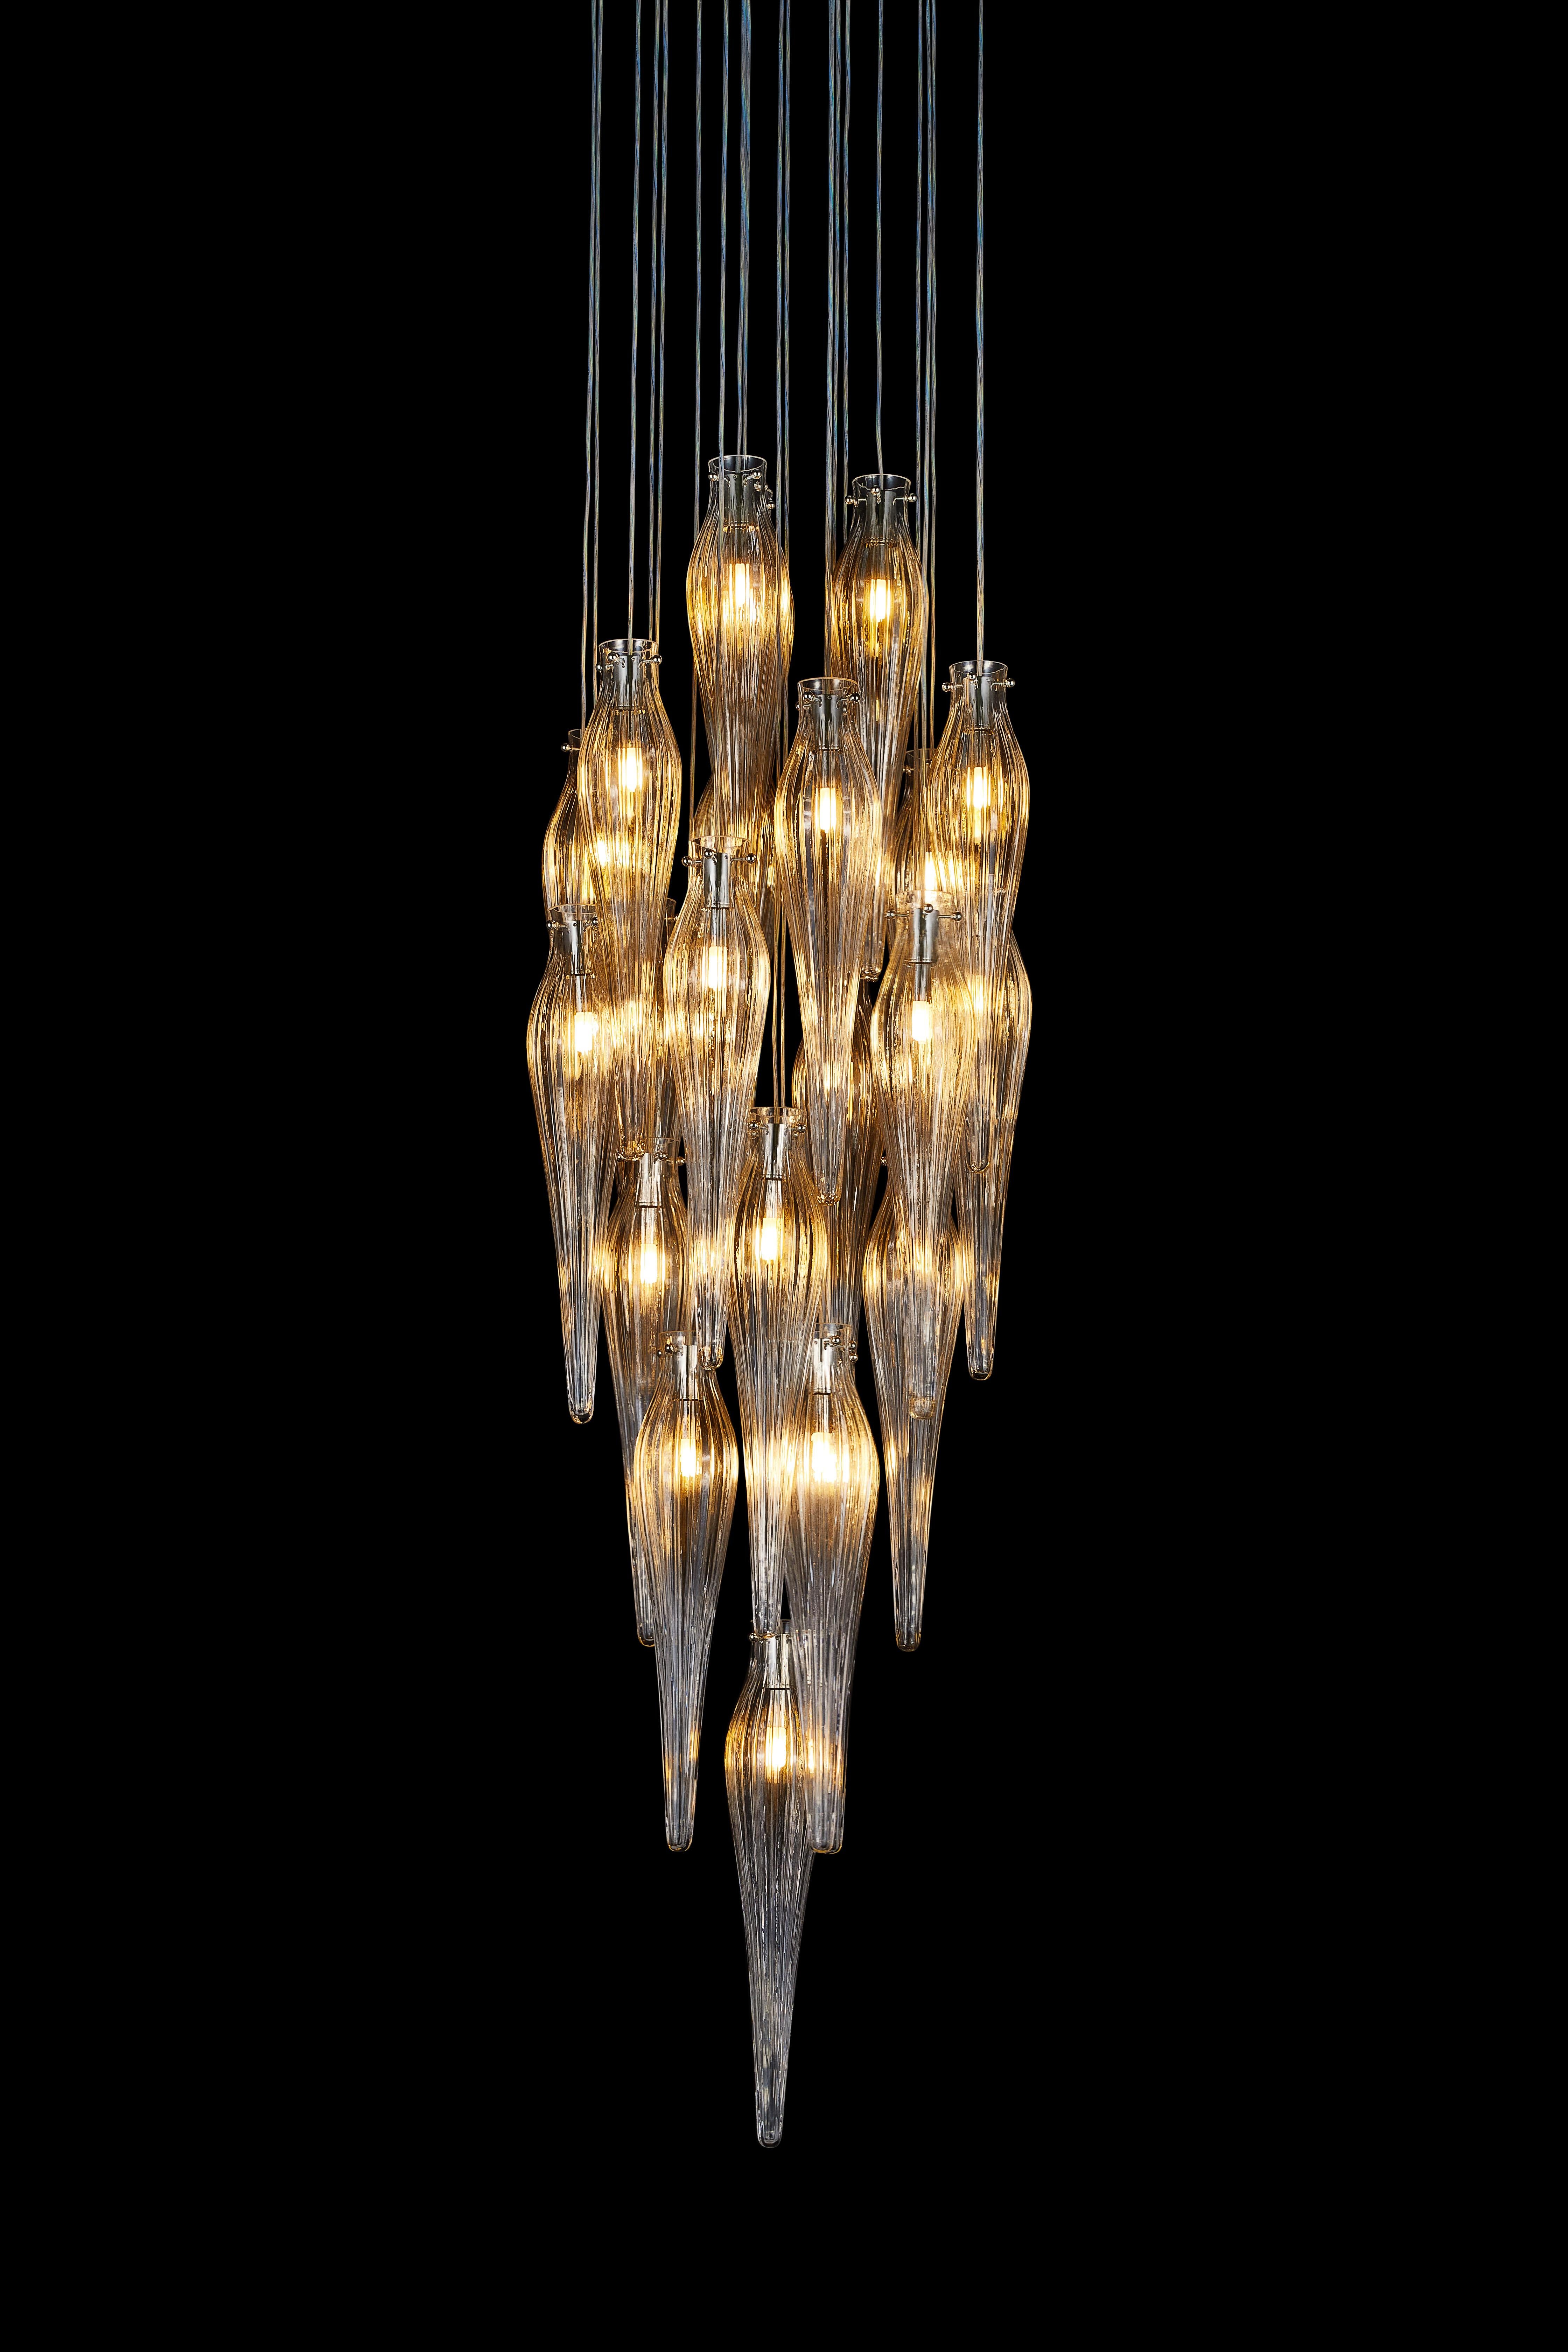 Create your own composition of light, glass and splendour. The hollow Icicles, available in 35 and 50 cm height, can be used to create any formation you wish for. An installation of magnificence for a grand lobby or a subtle composition over a